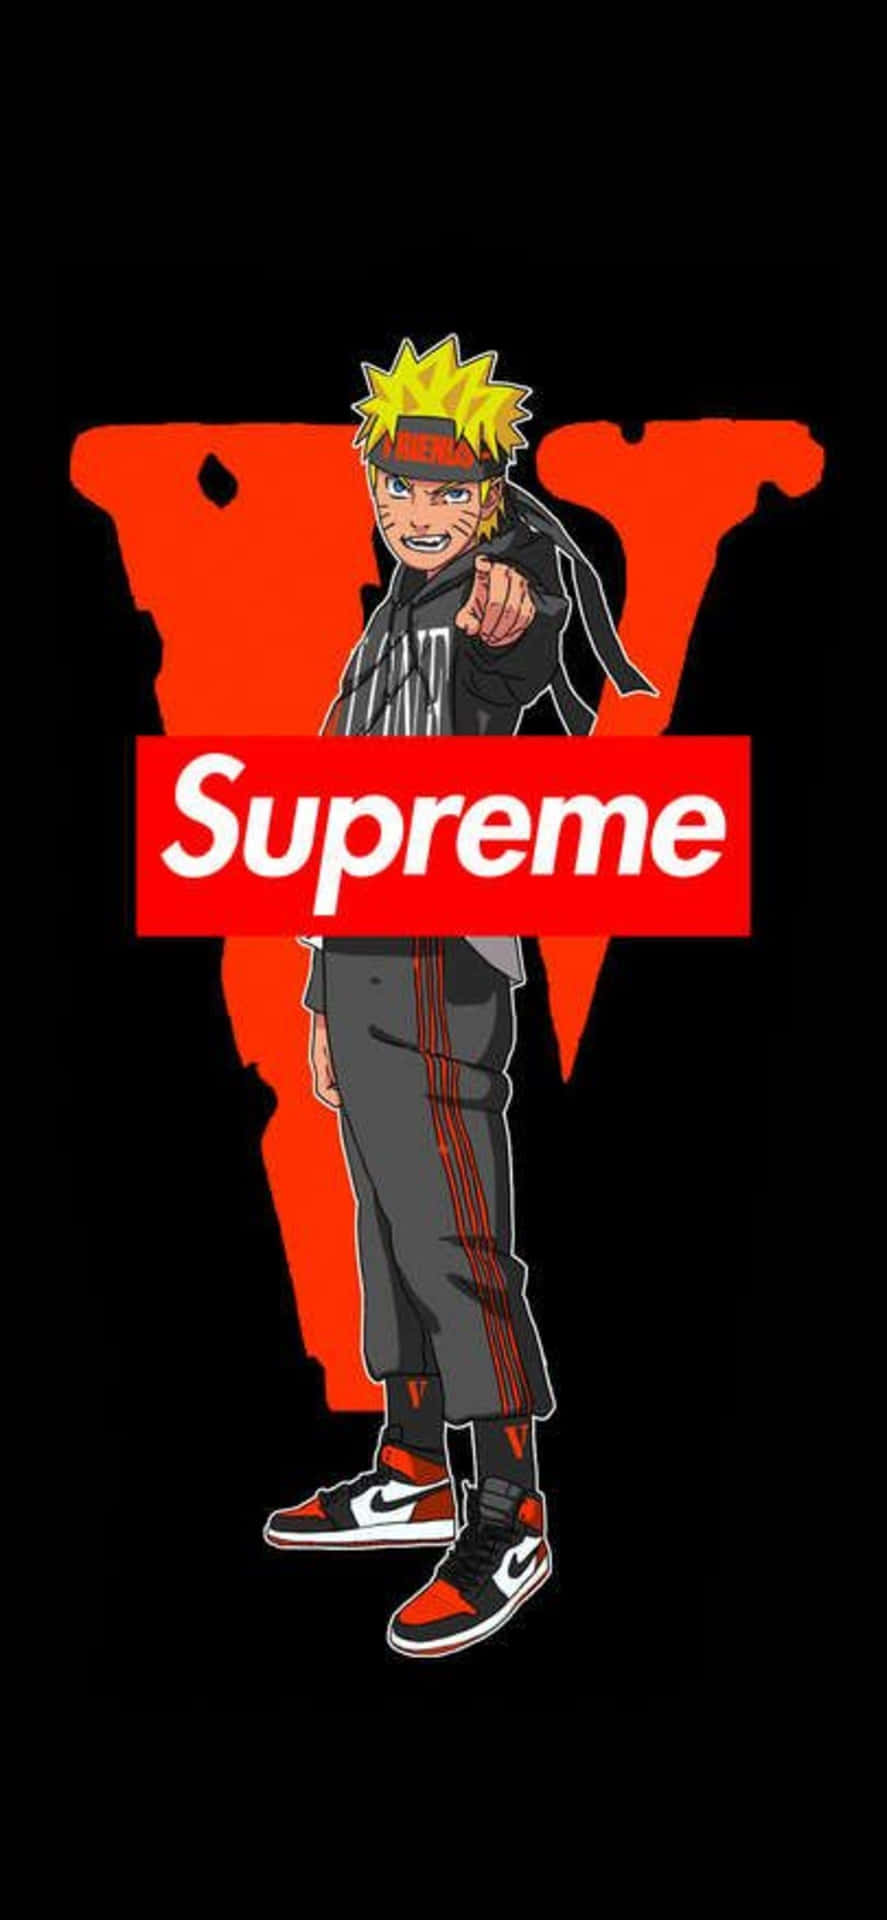 Anime characters look fashionable and stylish wearing streetwear from Supreme. Wallpaper